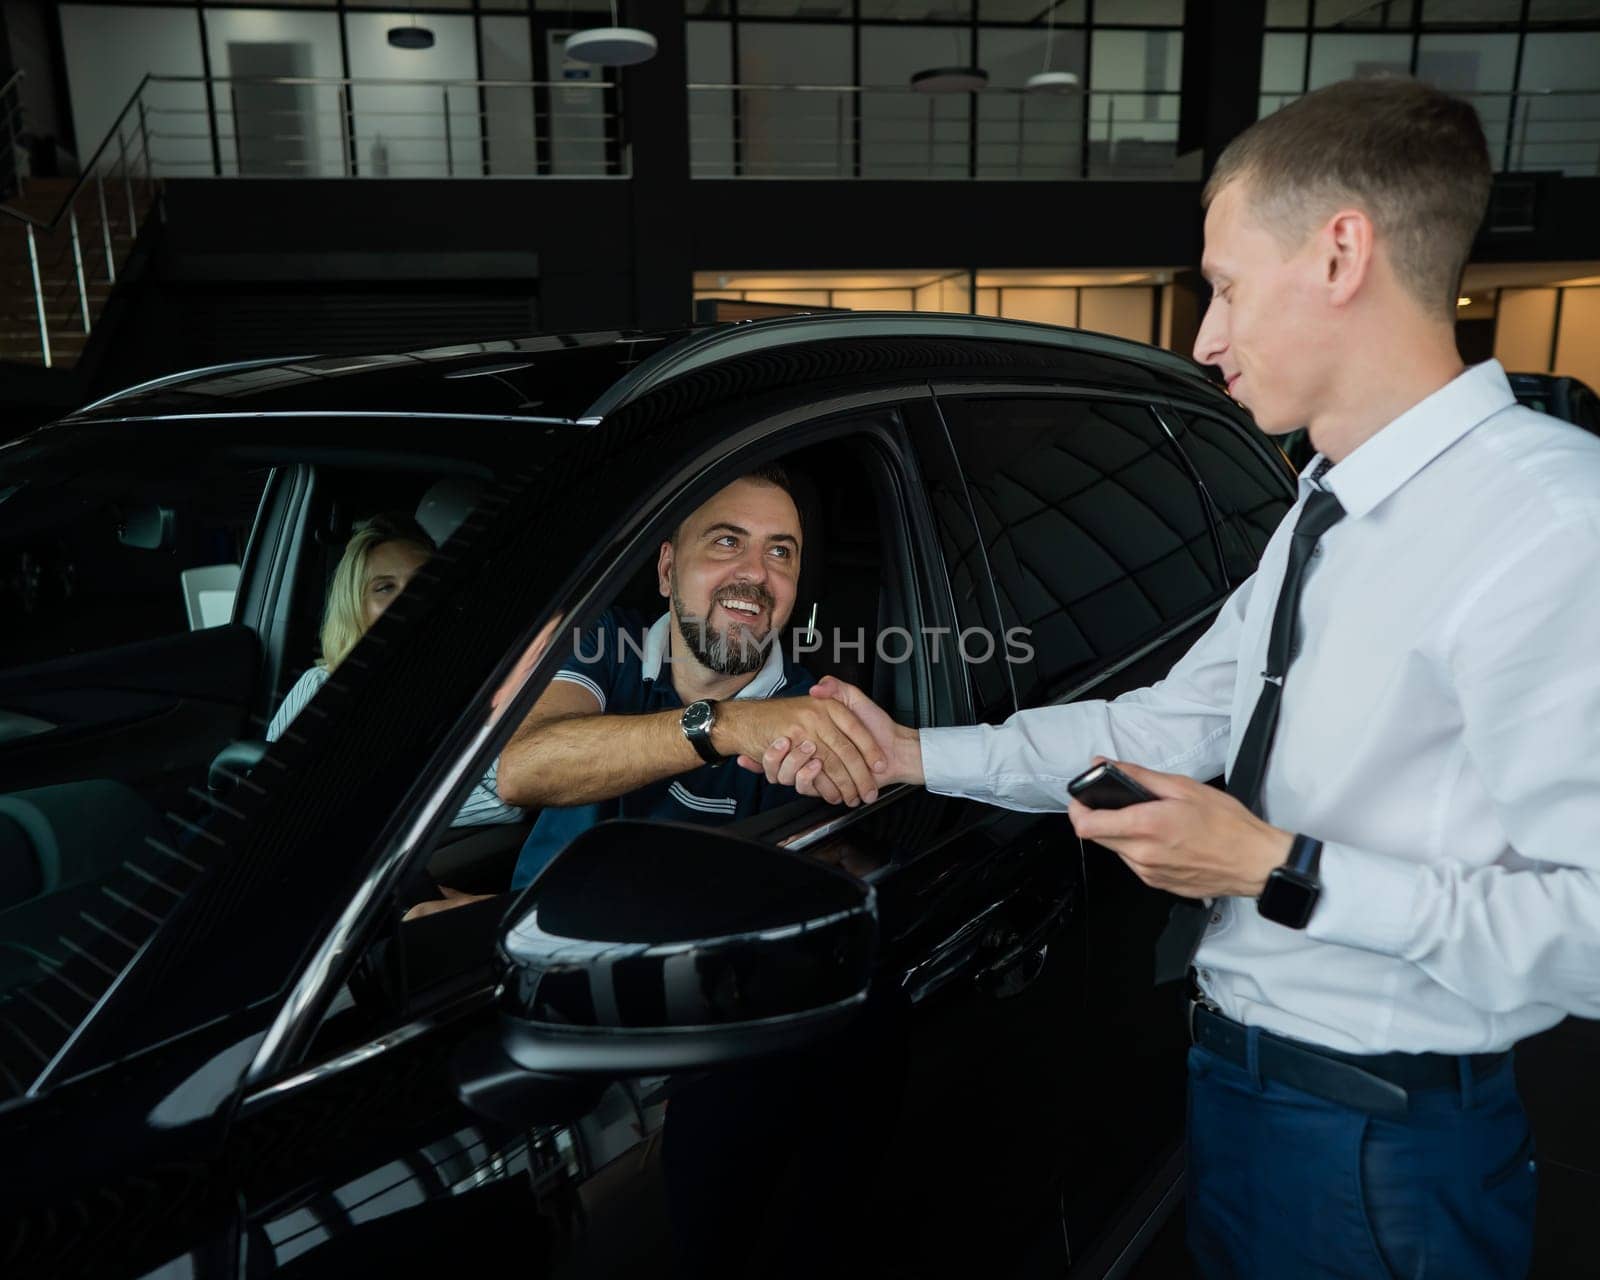 A caucasian couple shakes hands with a salesperson while buying a car. by mrwed54